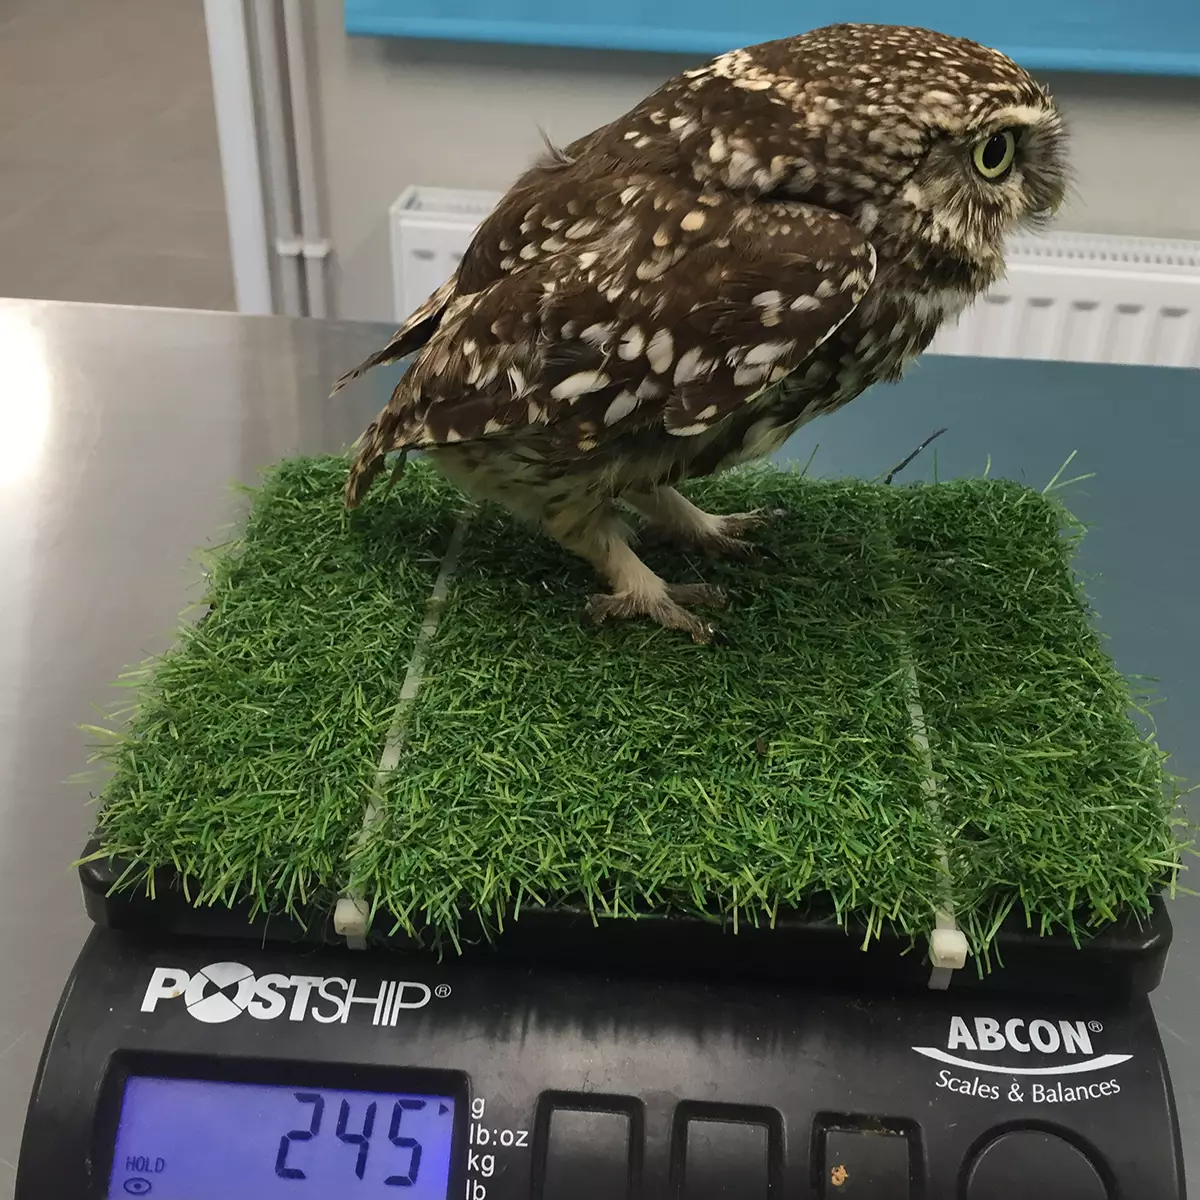 The owl was found to be roughly a third heavier than the average healthy female little owl (